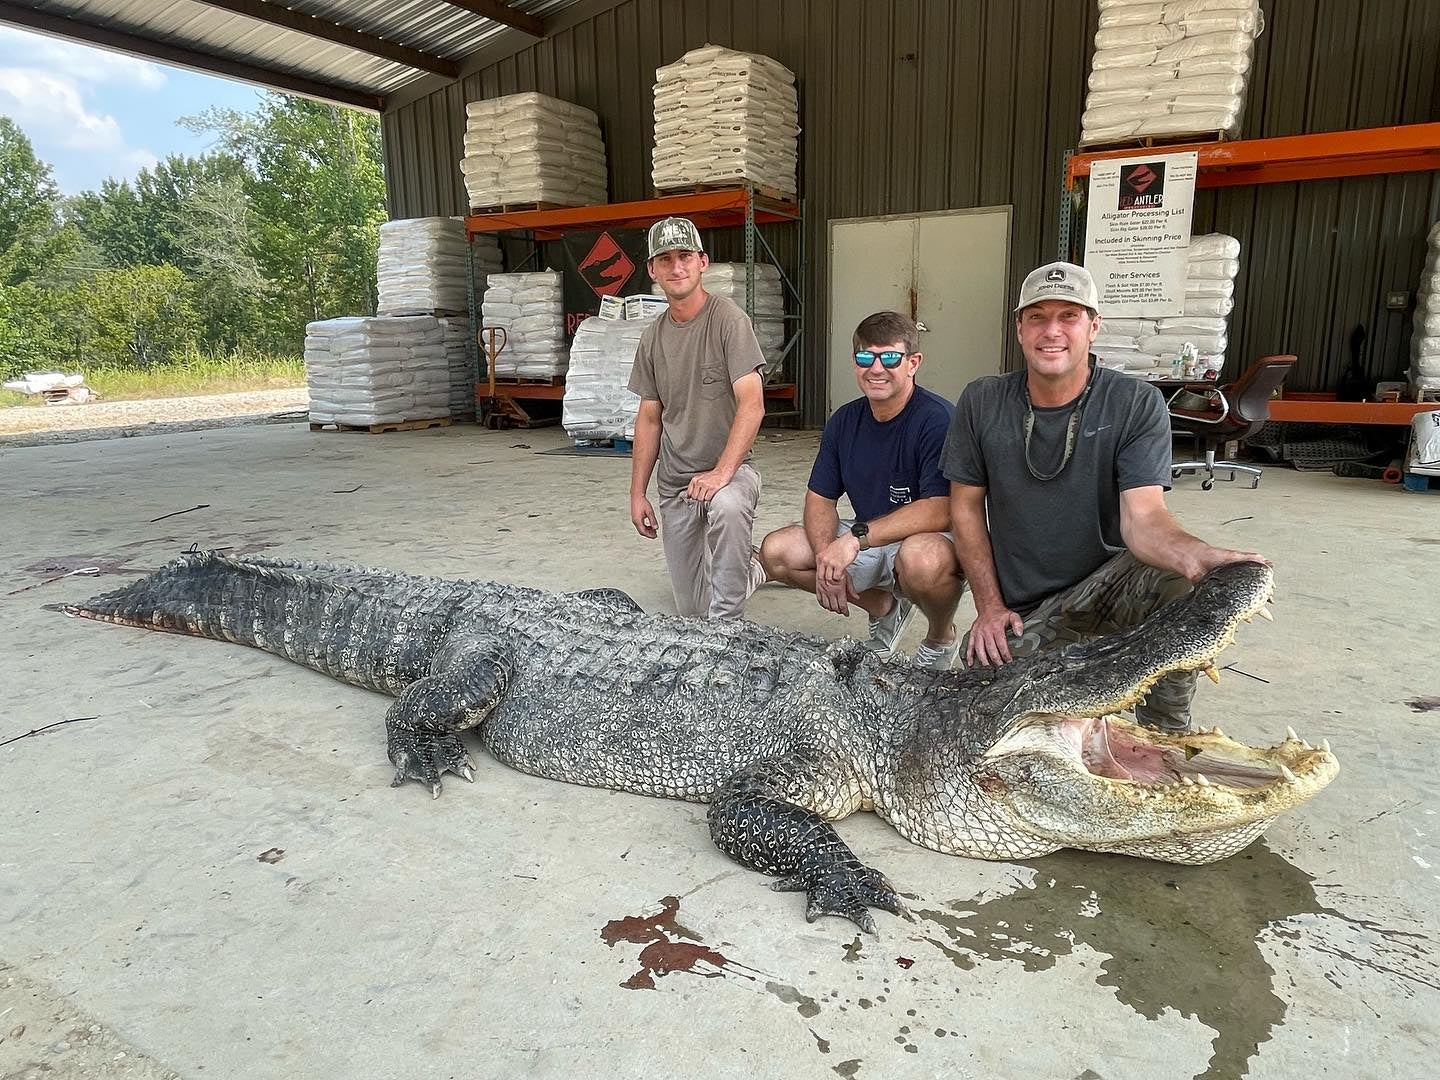 A new state record was broken by this huge beast, MSWFP confirms